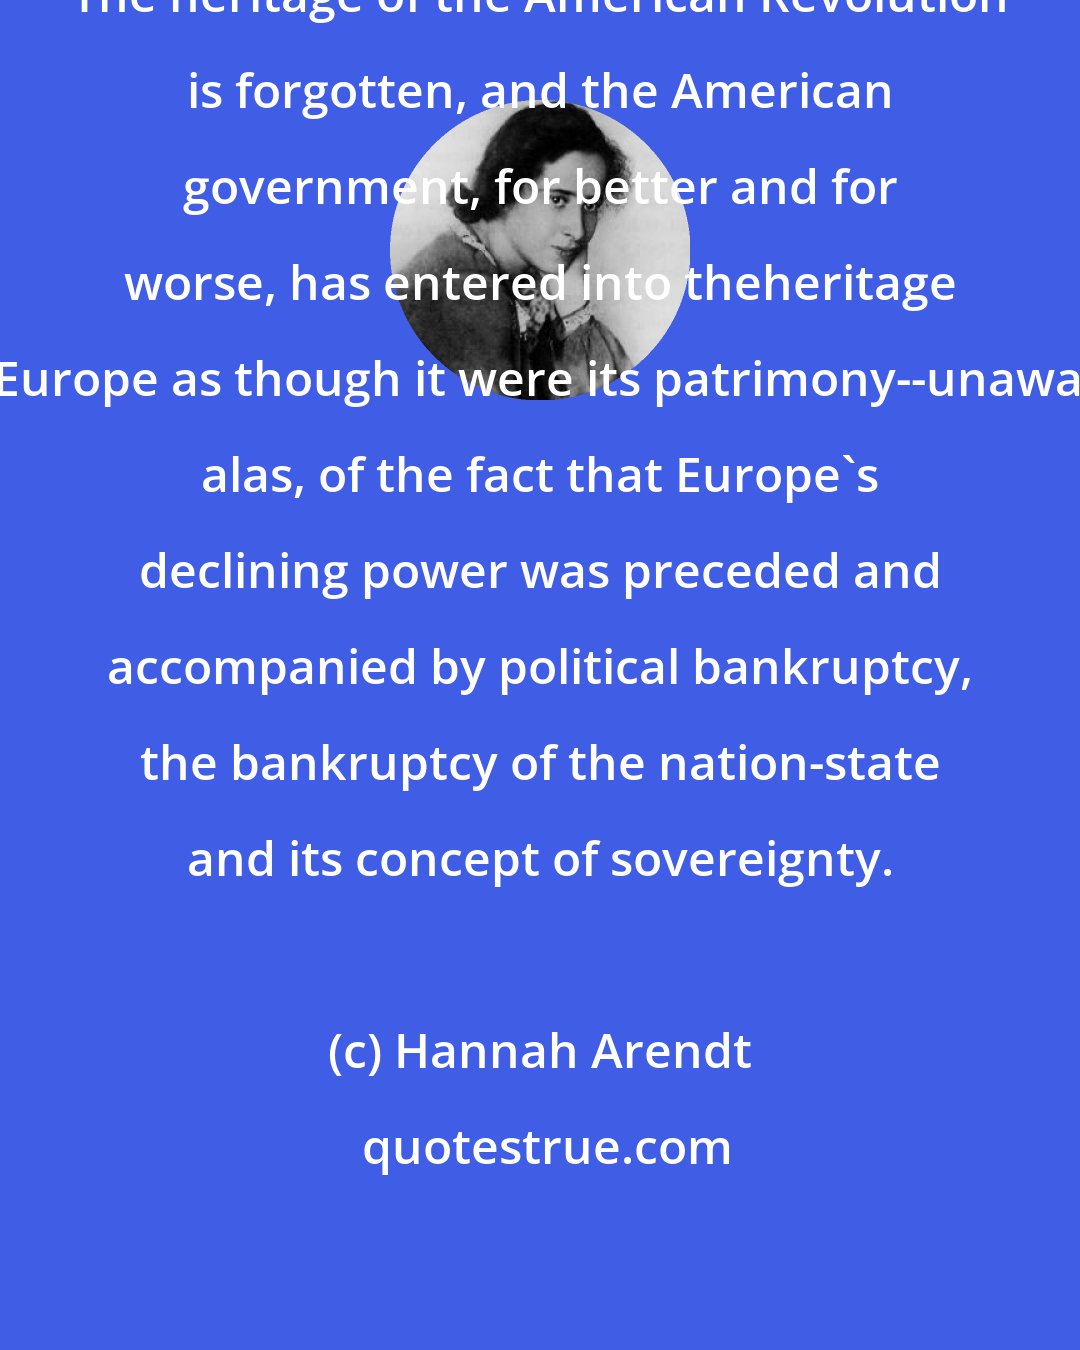 Hannah Arendt: The heritage of the American Revolution is forgotten, and the American government, for better and for worse, has entered into theheritage of Europe as though it were its patrimony--unaware, alas, of the fact that Europe's declining power was preceded and accompanied by political bankruptcy, the bankruptcy of the nation-state and its concept of sovereignty.